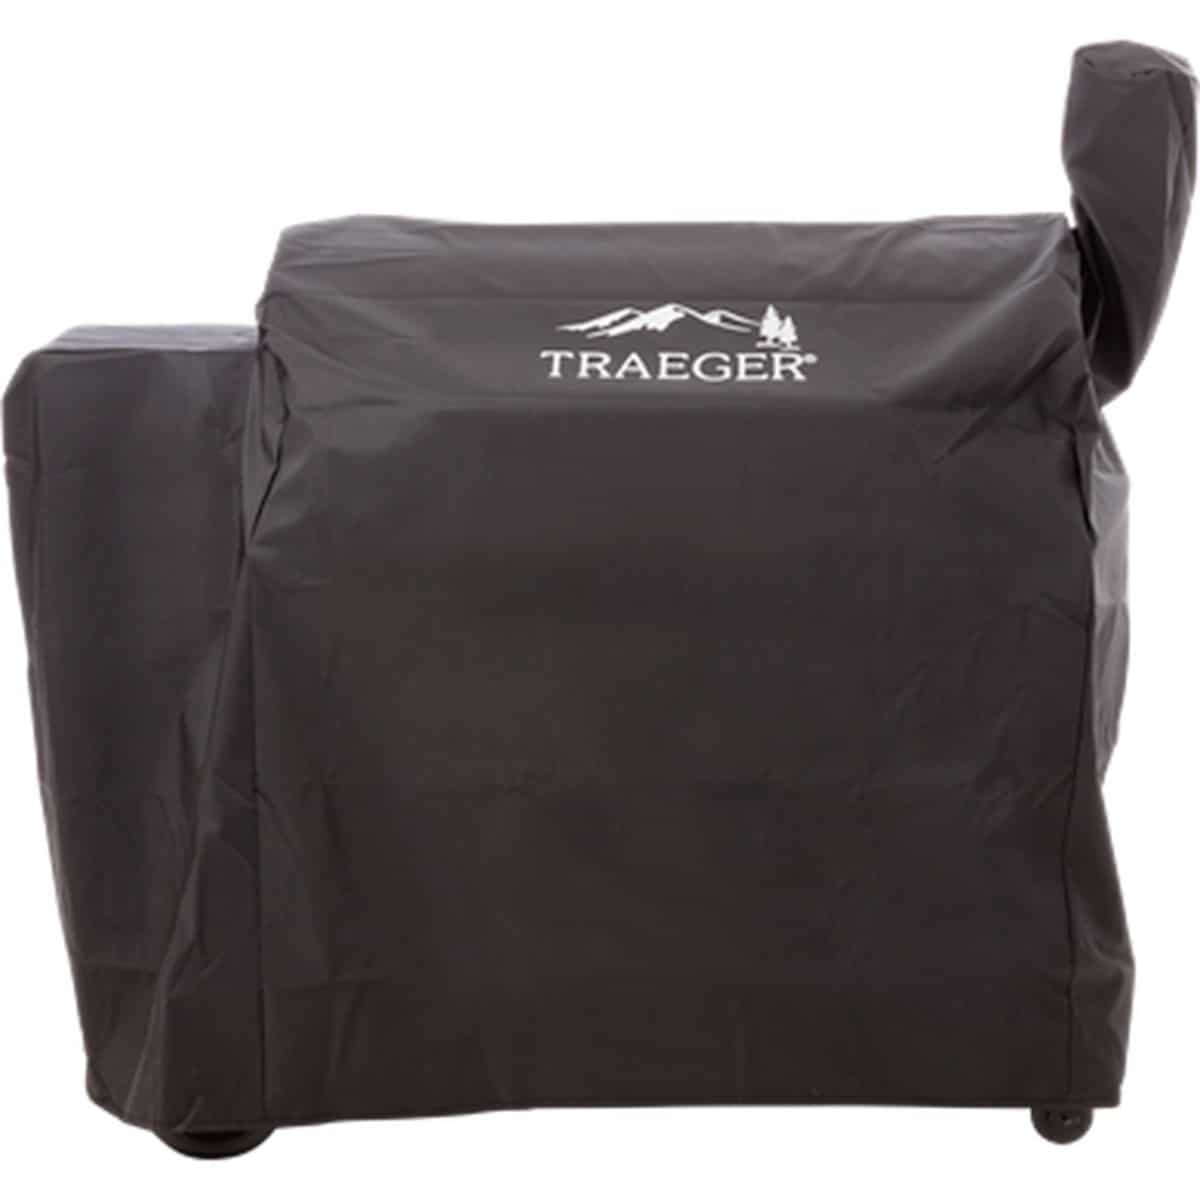 A black traeger grill cover covering a traeger smoker on a white background.